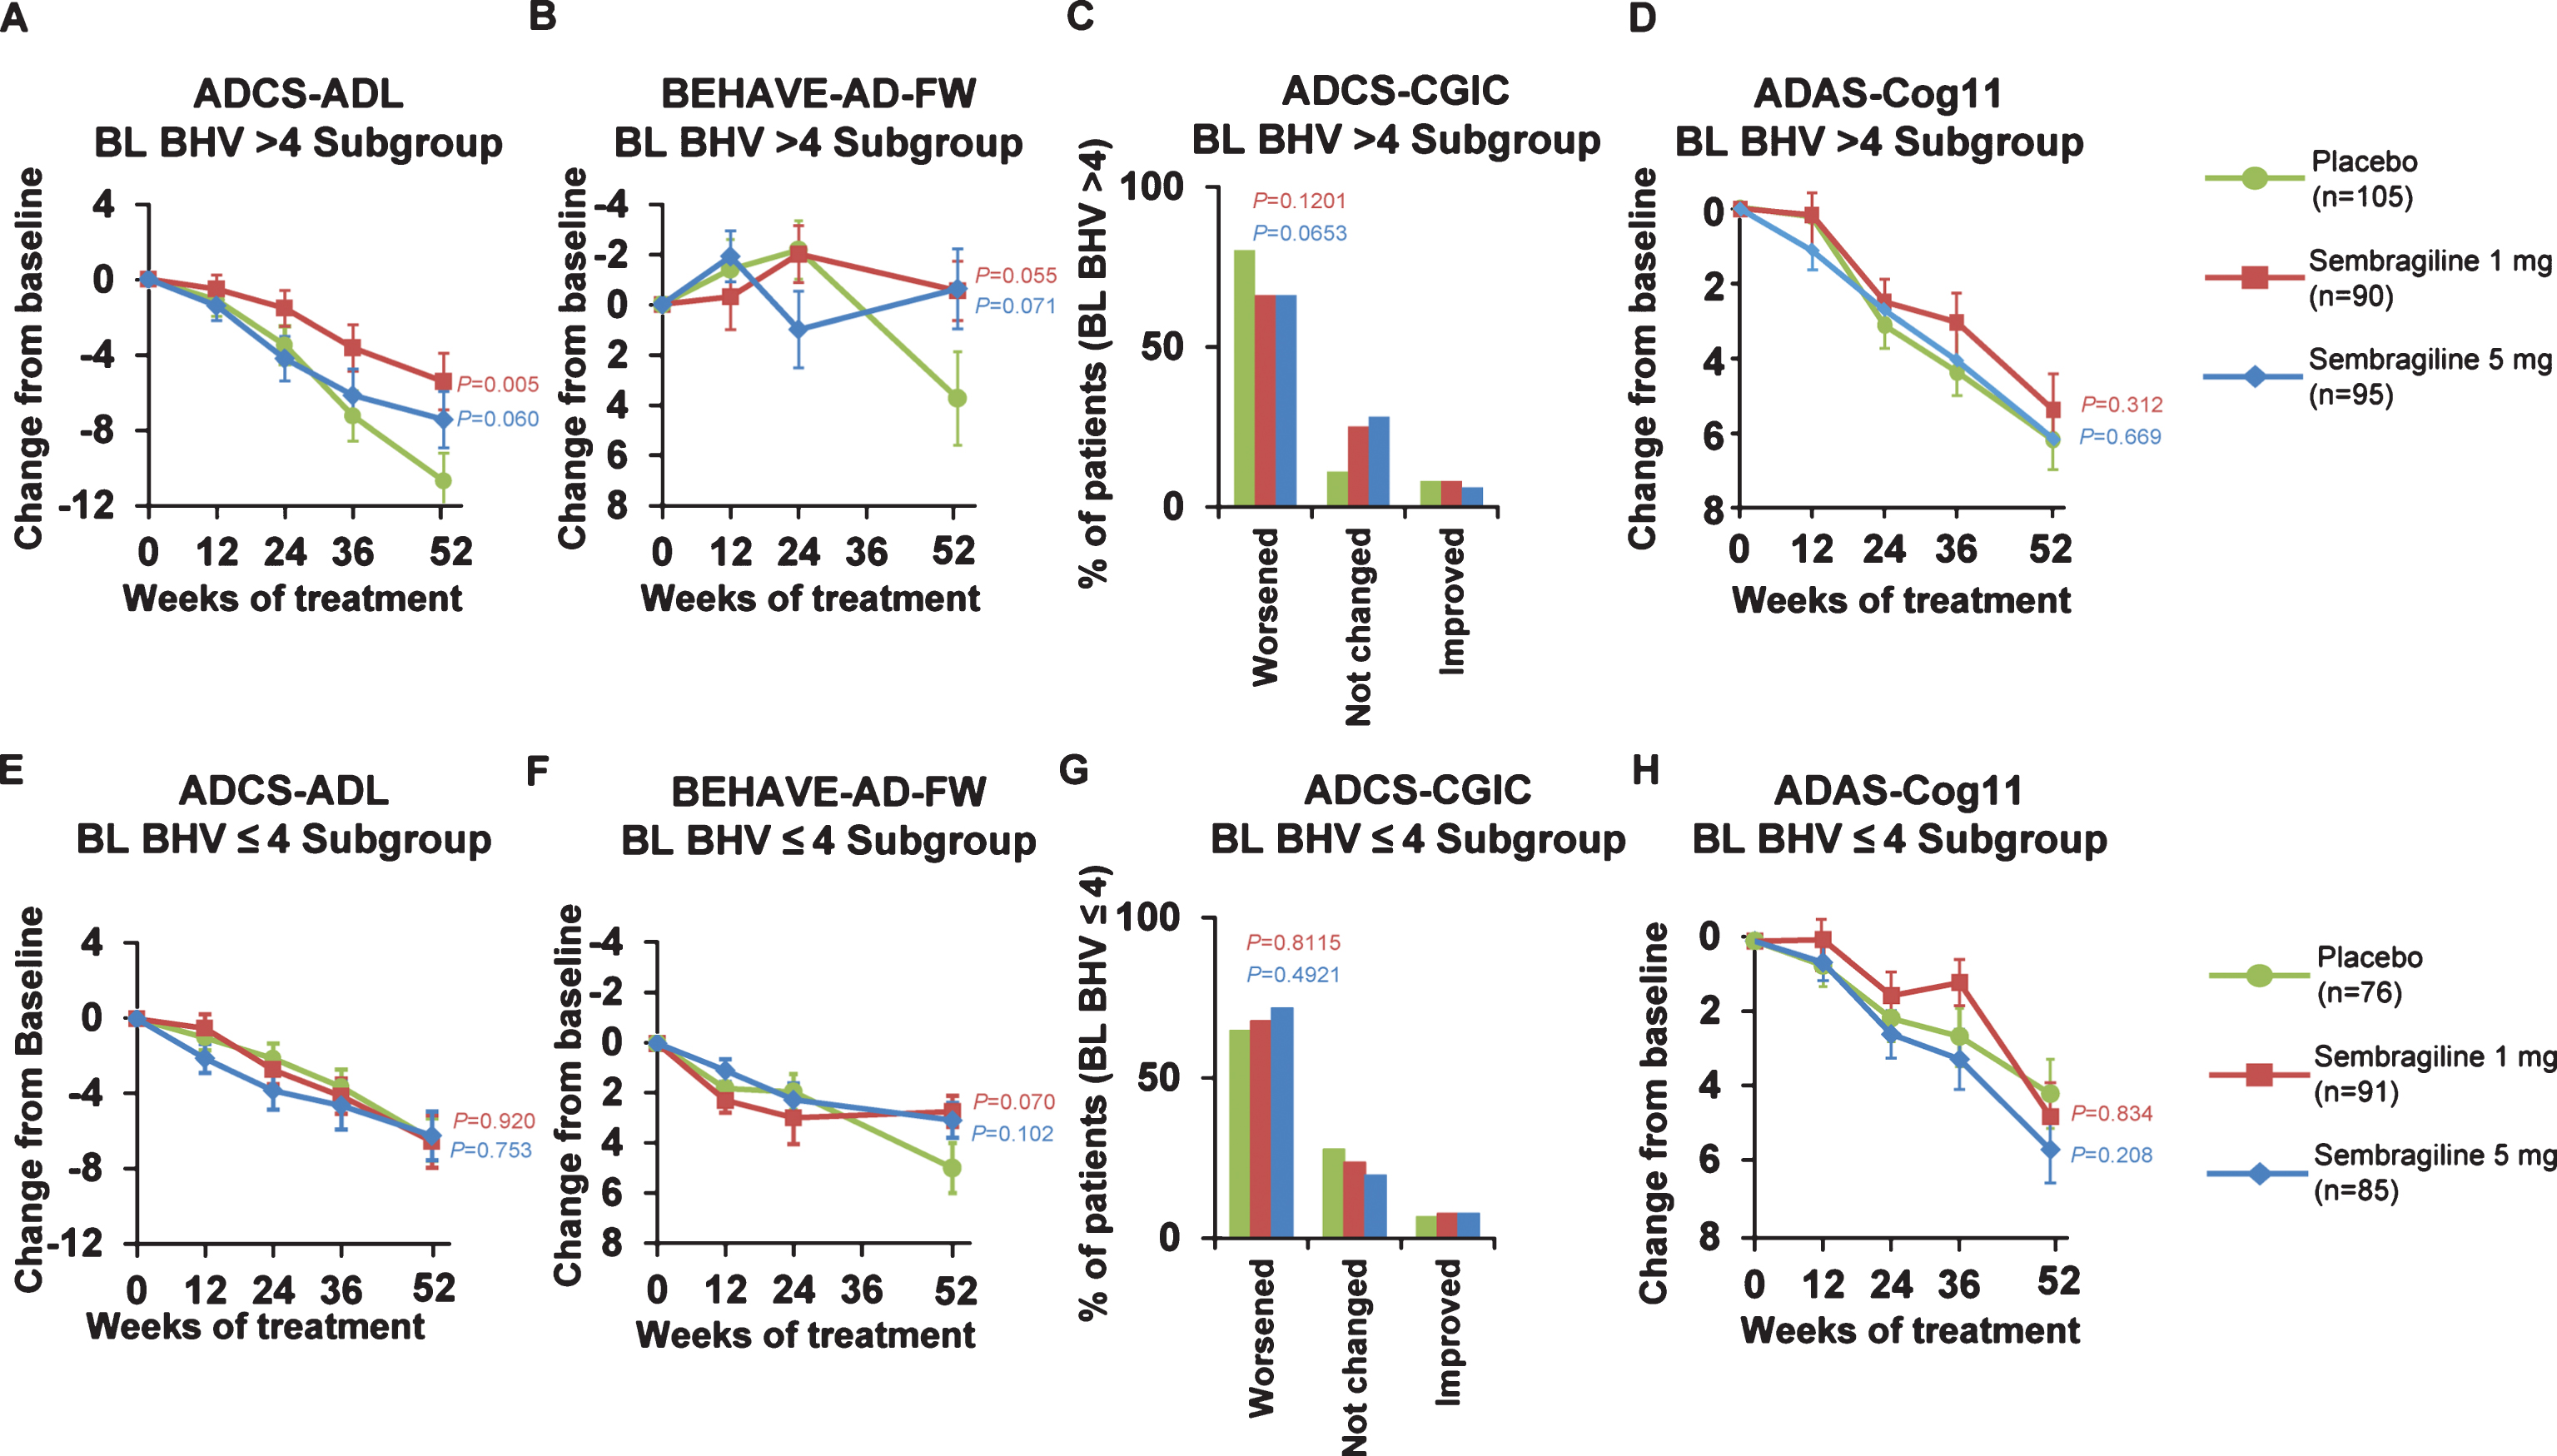 Post hoc subgroup analyses in subpopulations differing in behavioral impairment at baseline (exploratory endpoints). Change from baseline to Week 52 in mean ADCS-ADL, BEHAVE-AD-FW, ADCS-CGIC and ADAS-Cog11 scores in post hoc analyses in study subpopulations (A-D: more impaired, BHV >4 at baseline; E-H: less impaired BHV≤4 at baseline). Error bars represent SEM. ADAS-Cog11, Alzheimer’s Disease Assessment Scale-Cognitive Behavior 11-item Subscale; ADCS-ADL, Alzheimer’s Disease Cooperative Study-Activities of Daily Living; ADCS-CGIC, Alzheimer’s Disease Cooperative Study-Clinical Global Impression of Change; BEHAVE-AD-FW, Behavioral Pathology in Alzheimer’s Disease Frequency-Weighted Severity Scale; BL BHV, baseline BEHAVE-AD-FW; SEM, standard error of the mean.